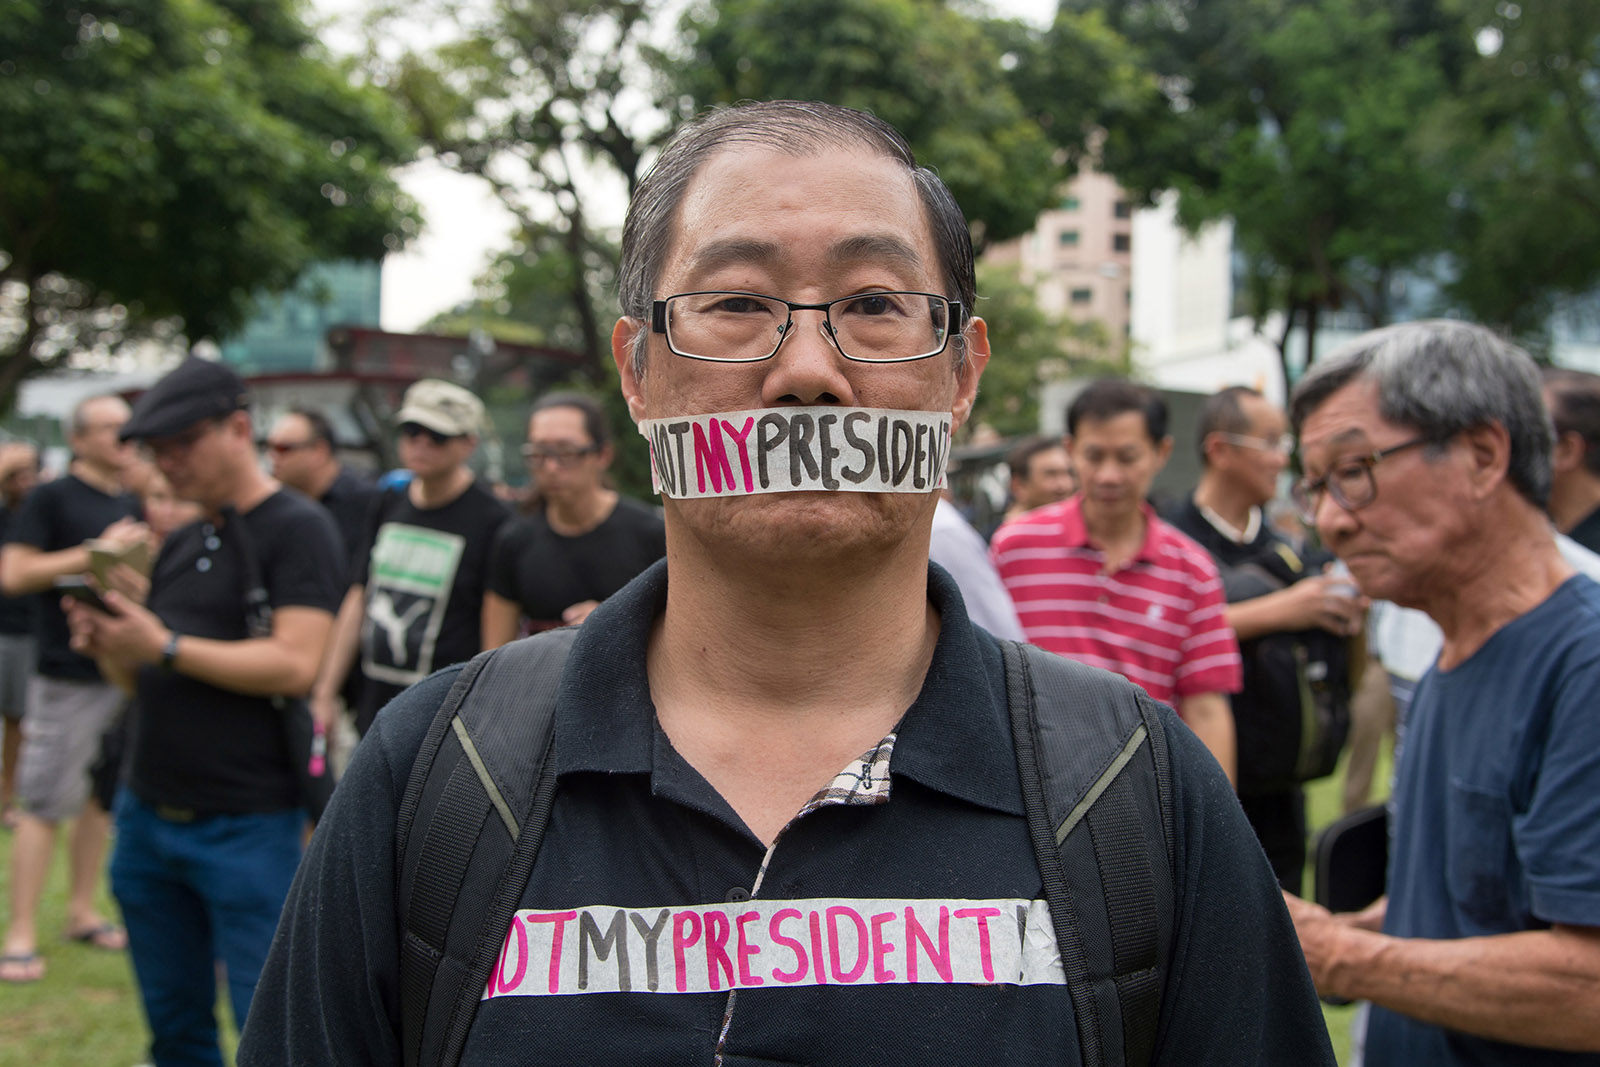 A rare political protest in Singapore, against the walkover victory of Halimah Yacob in the republic’s presidential election, September 16, 2017